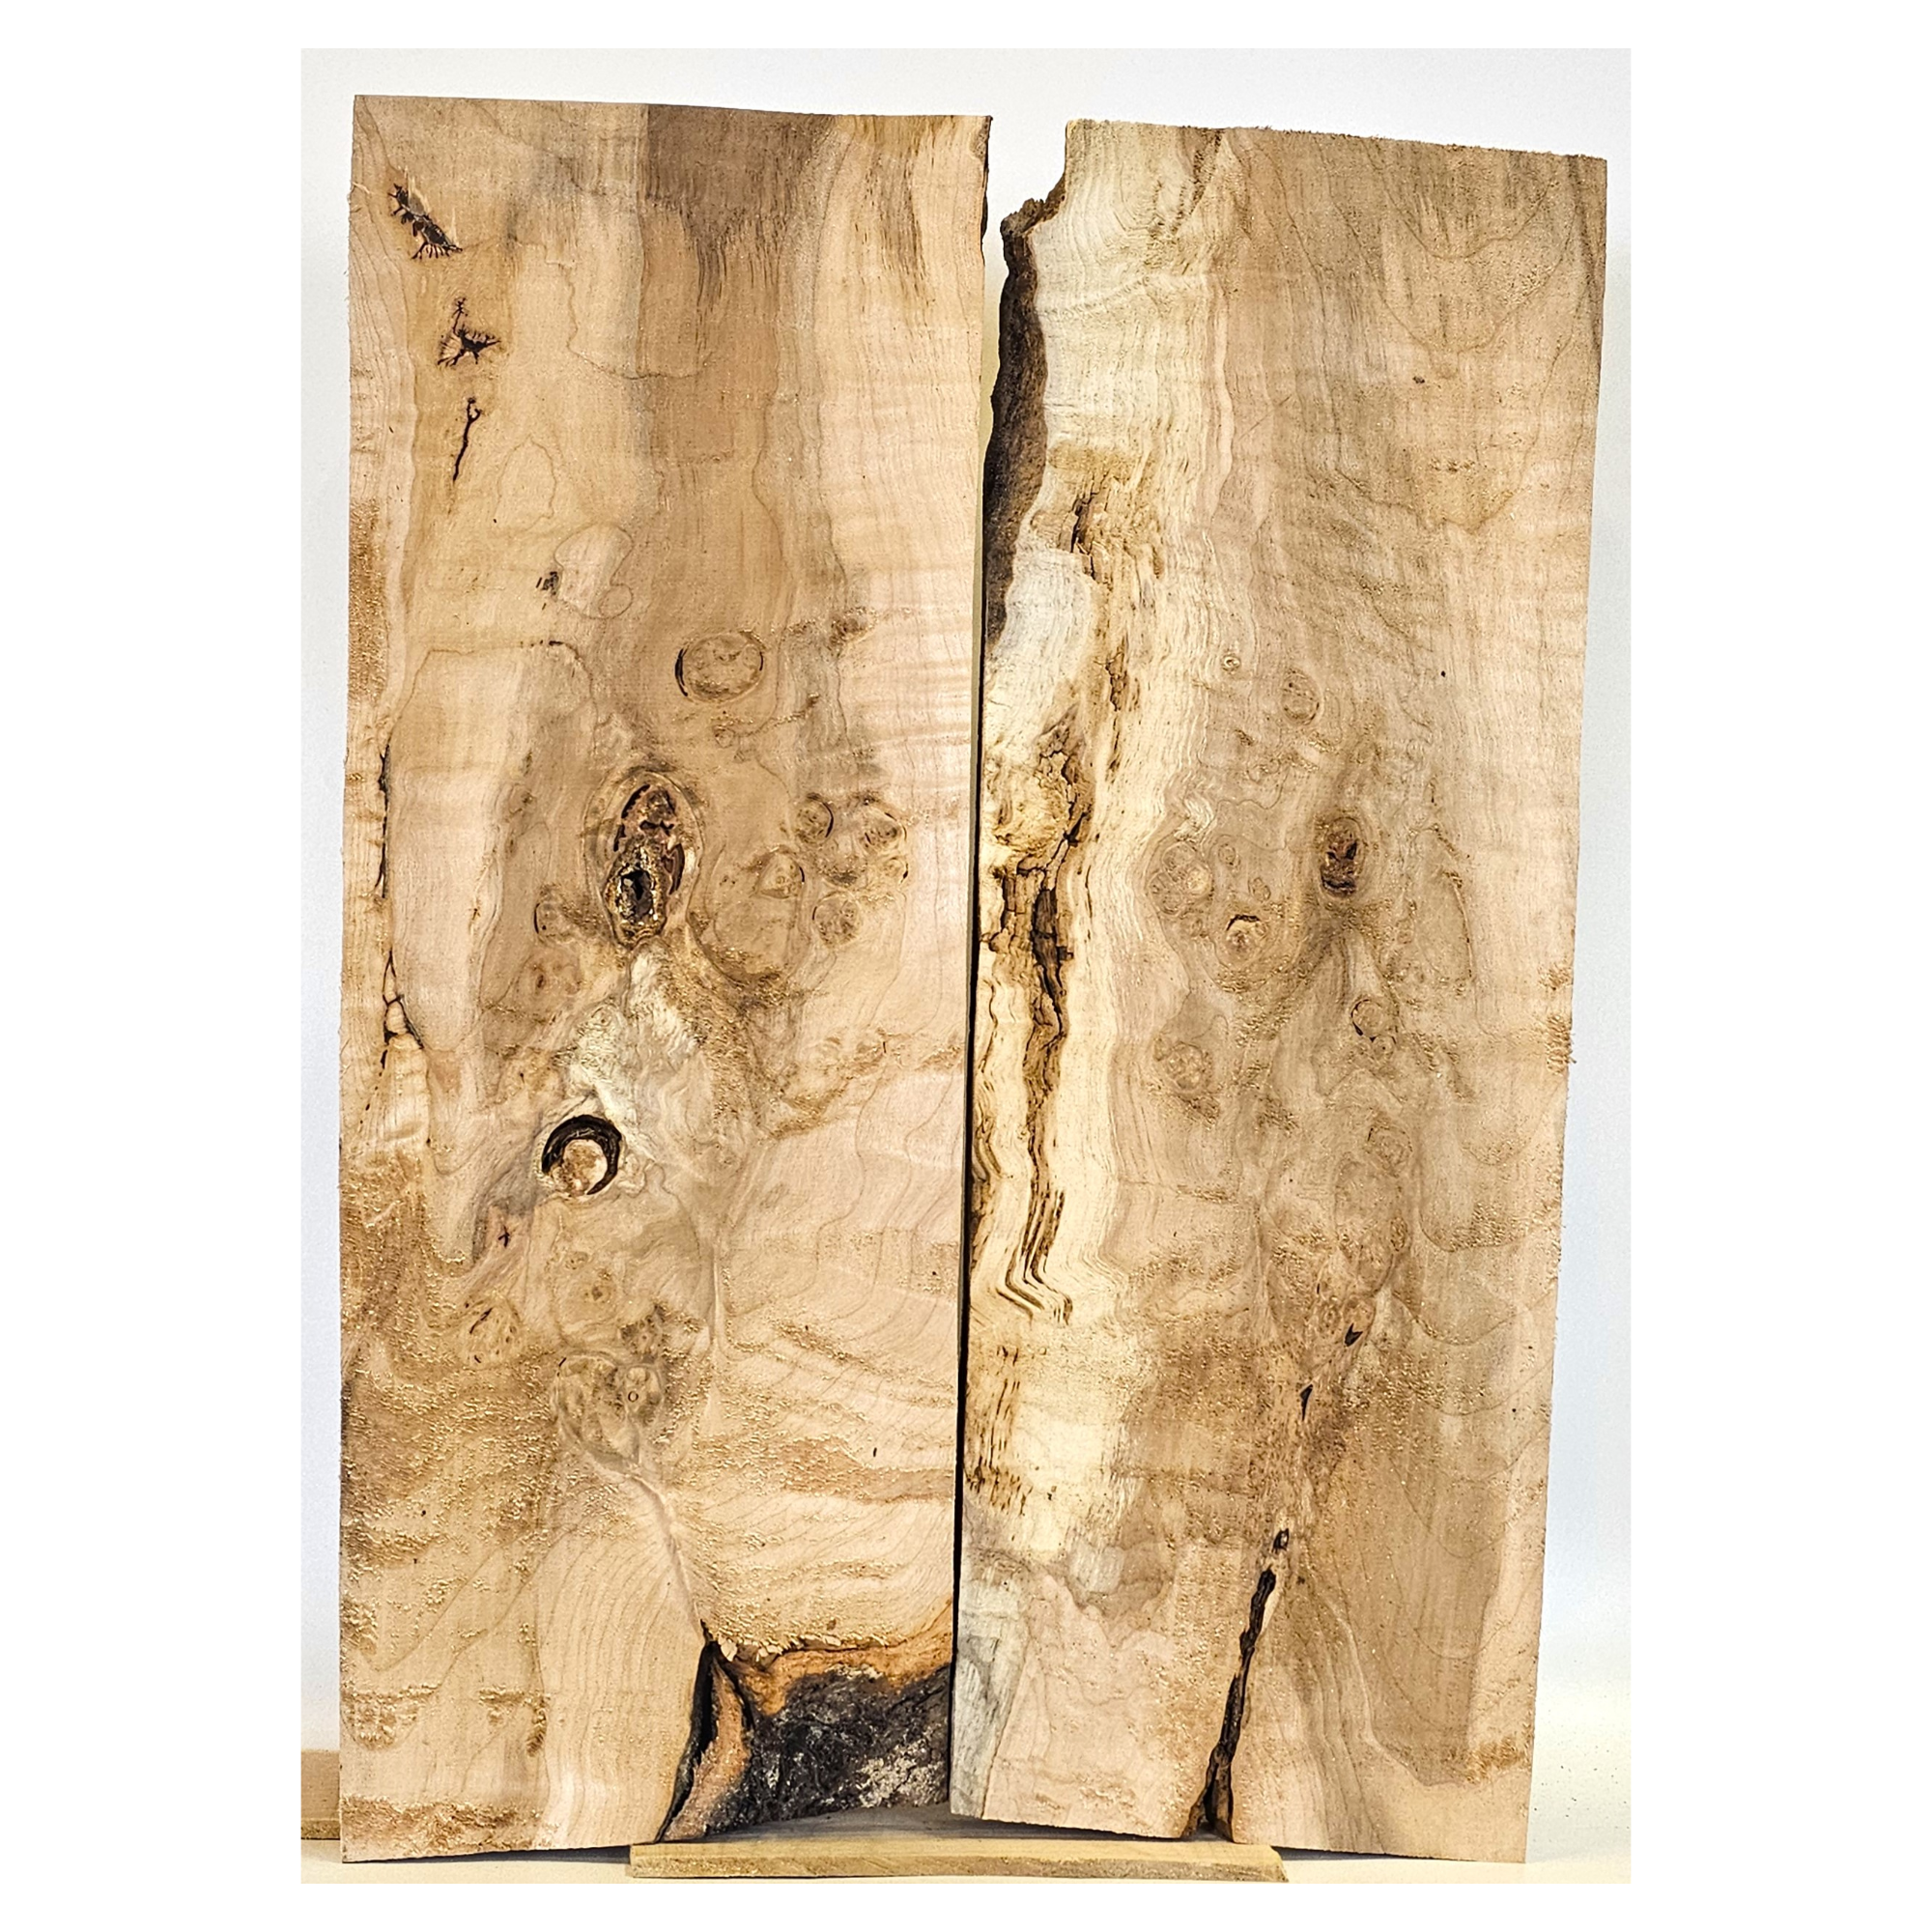 Beautiful maple burl 2-piece set with large eye spots, light curl, wonderful patterning, and rich color. 